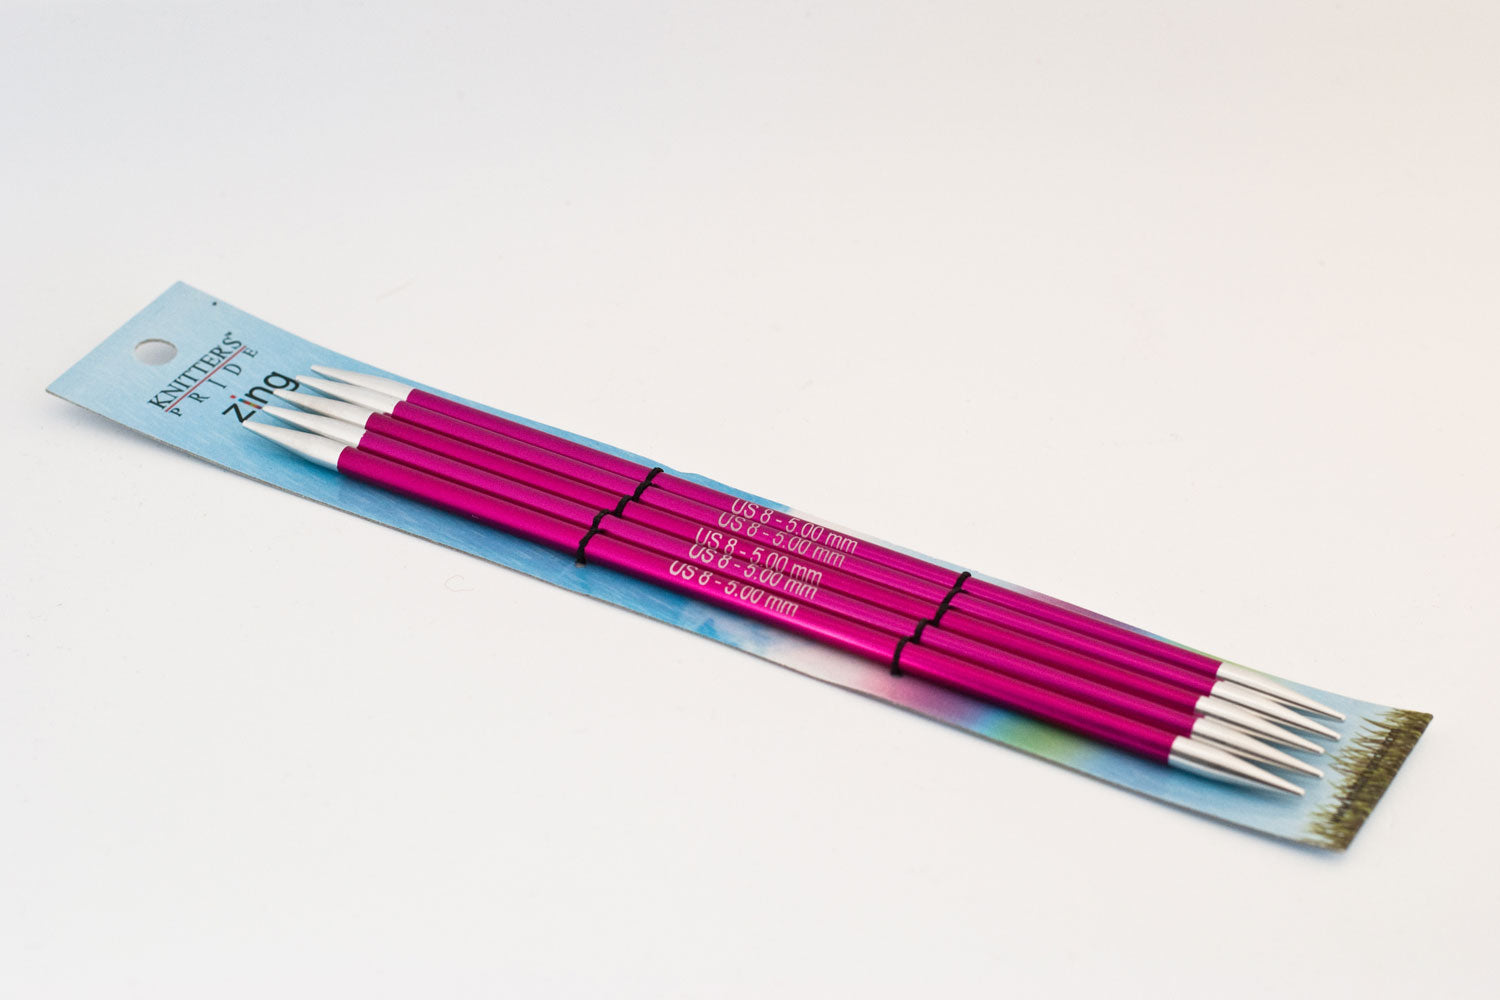 Knitter's Pride Zing 8 inch (20 cm) Double Point Knitting Needles